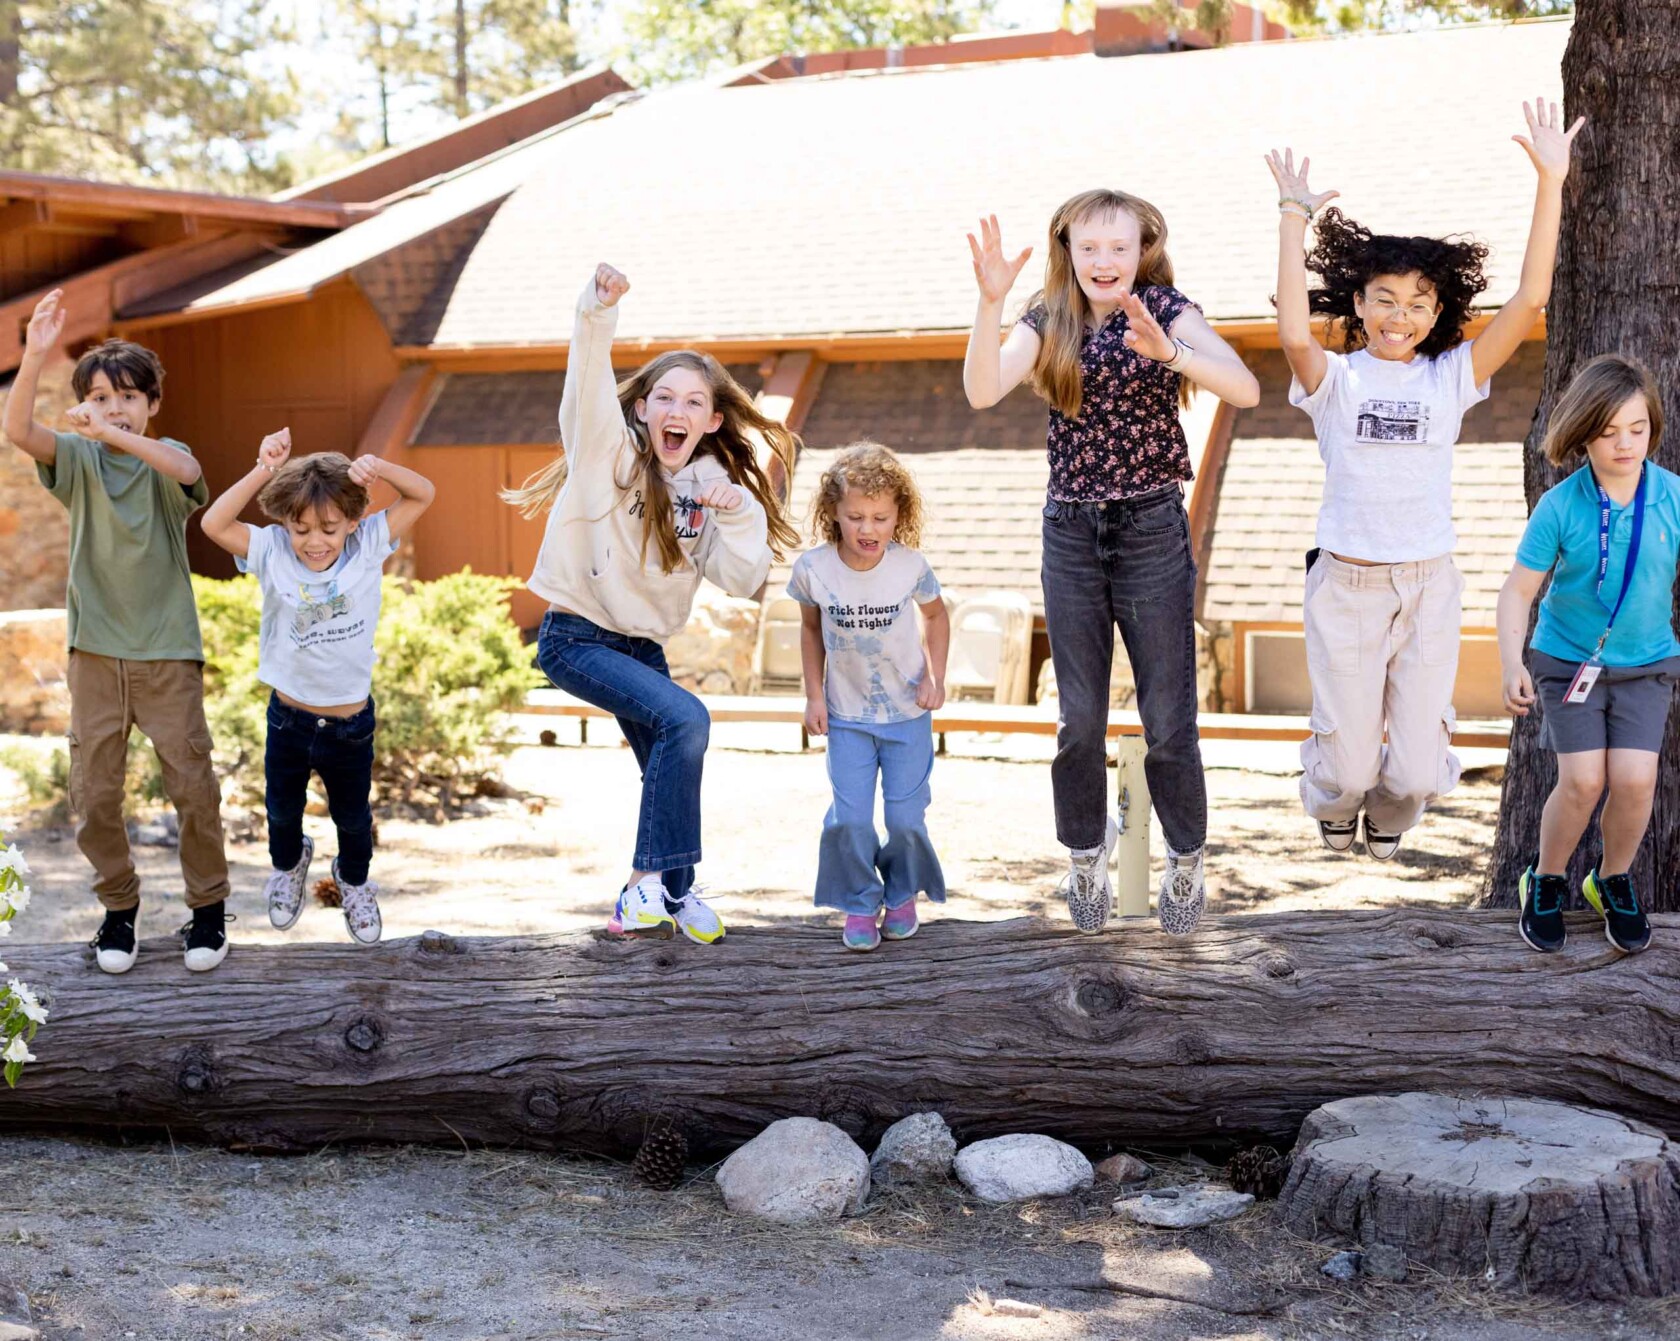 A group of happy kids jumping together.